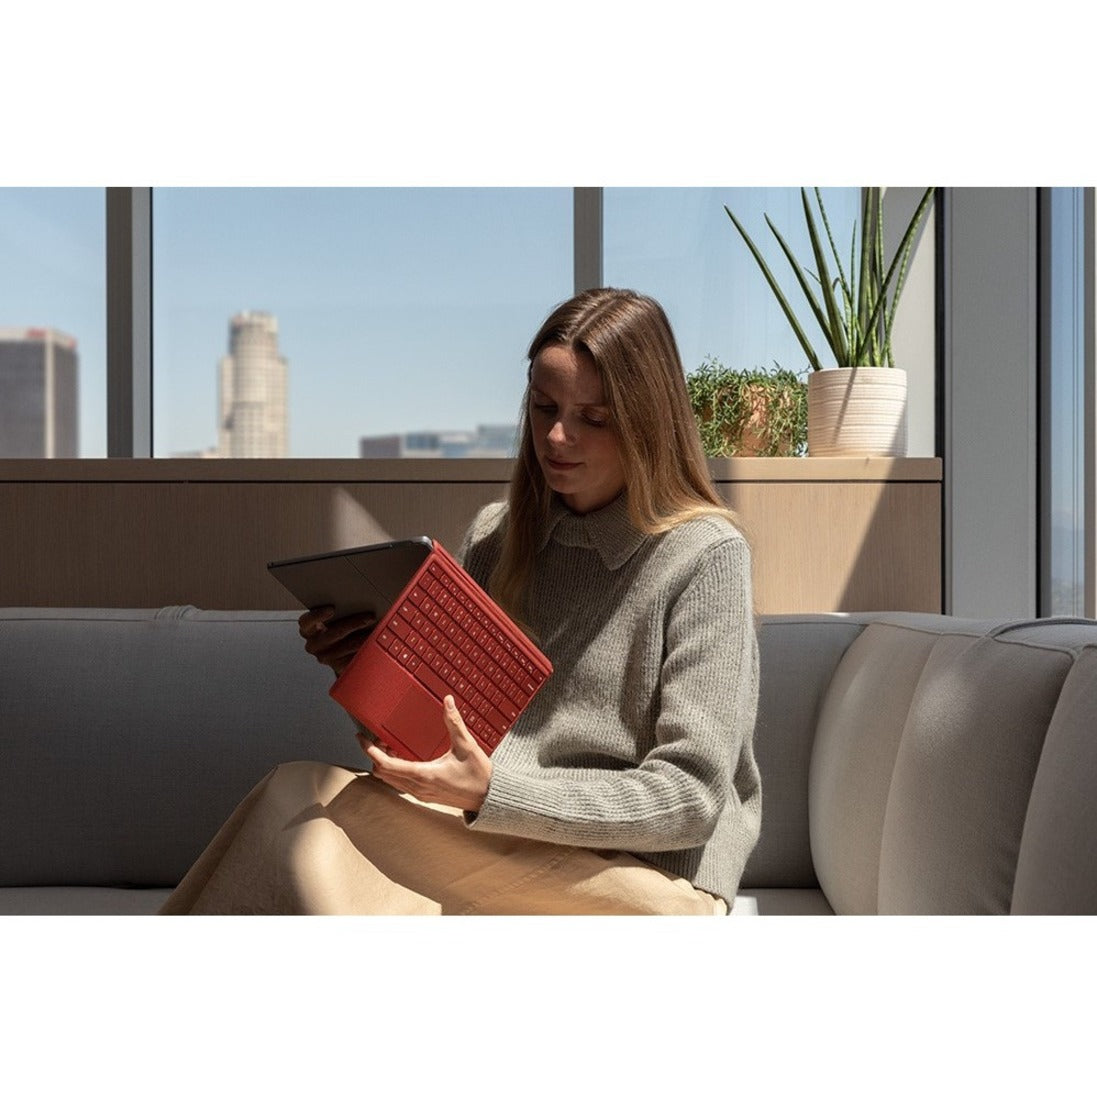 Microsoft KCT-00061 Surface Go Type Cover - English, Poppy Red Alcantara Keyboard/Cover Case